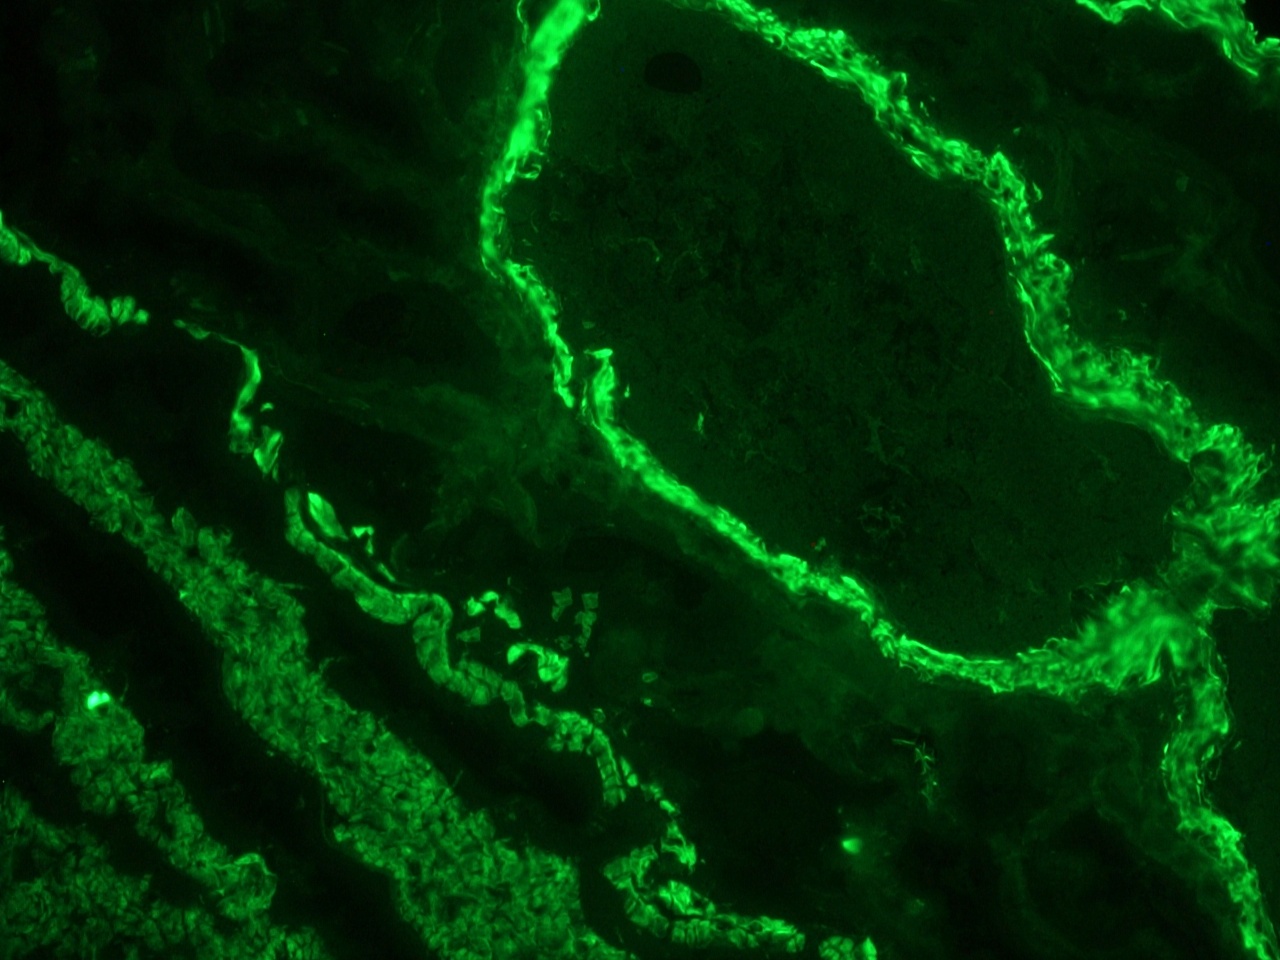 Figure 1. Indirect immunofluoresence staining of a frozen section of human colon using MUB0100P (clone 1A4) showing strong reactivity on the smooth muscle cells at a dilution of 1:500.